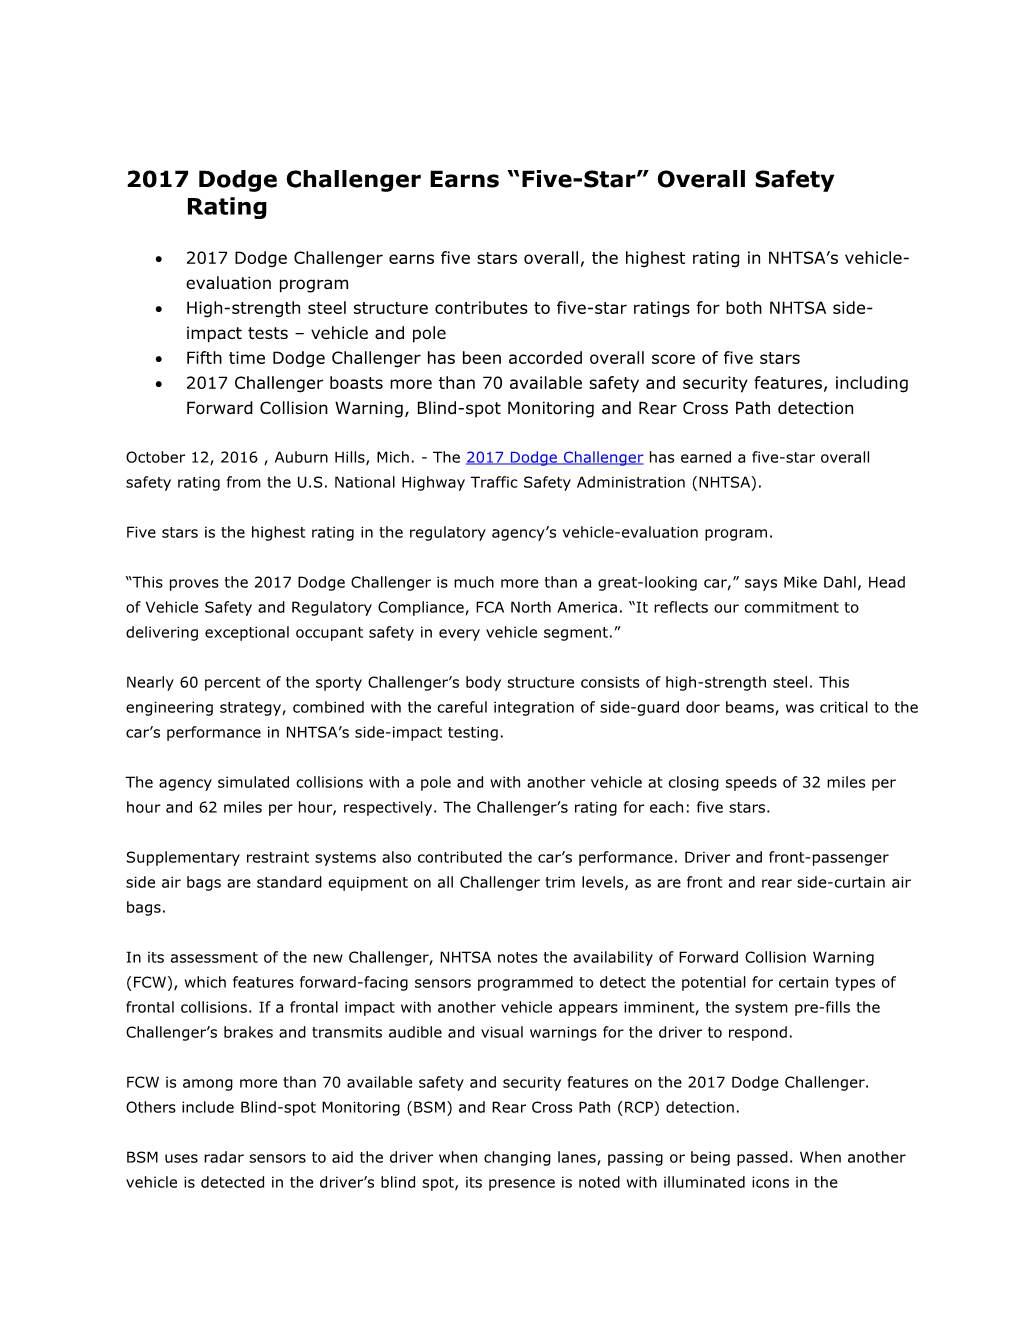 2017 Dodge Challenger Earns Five-Star Overall Safety Rating